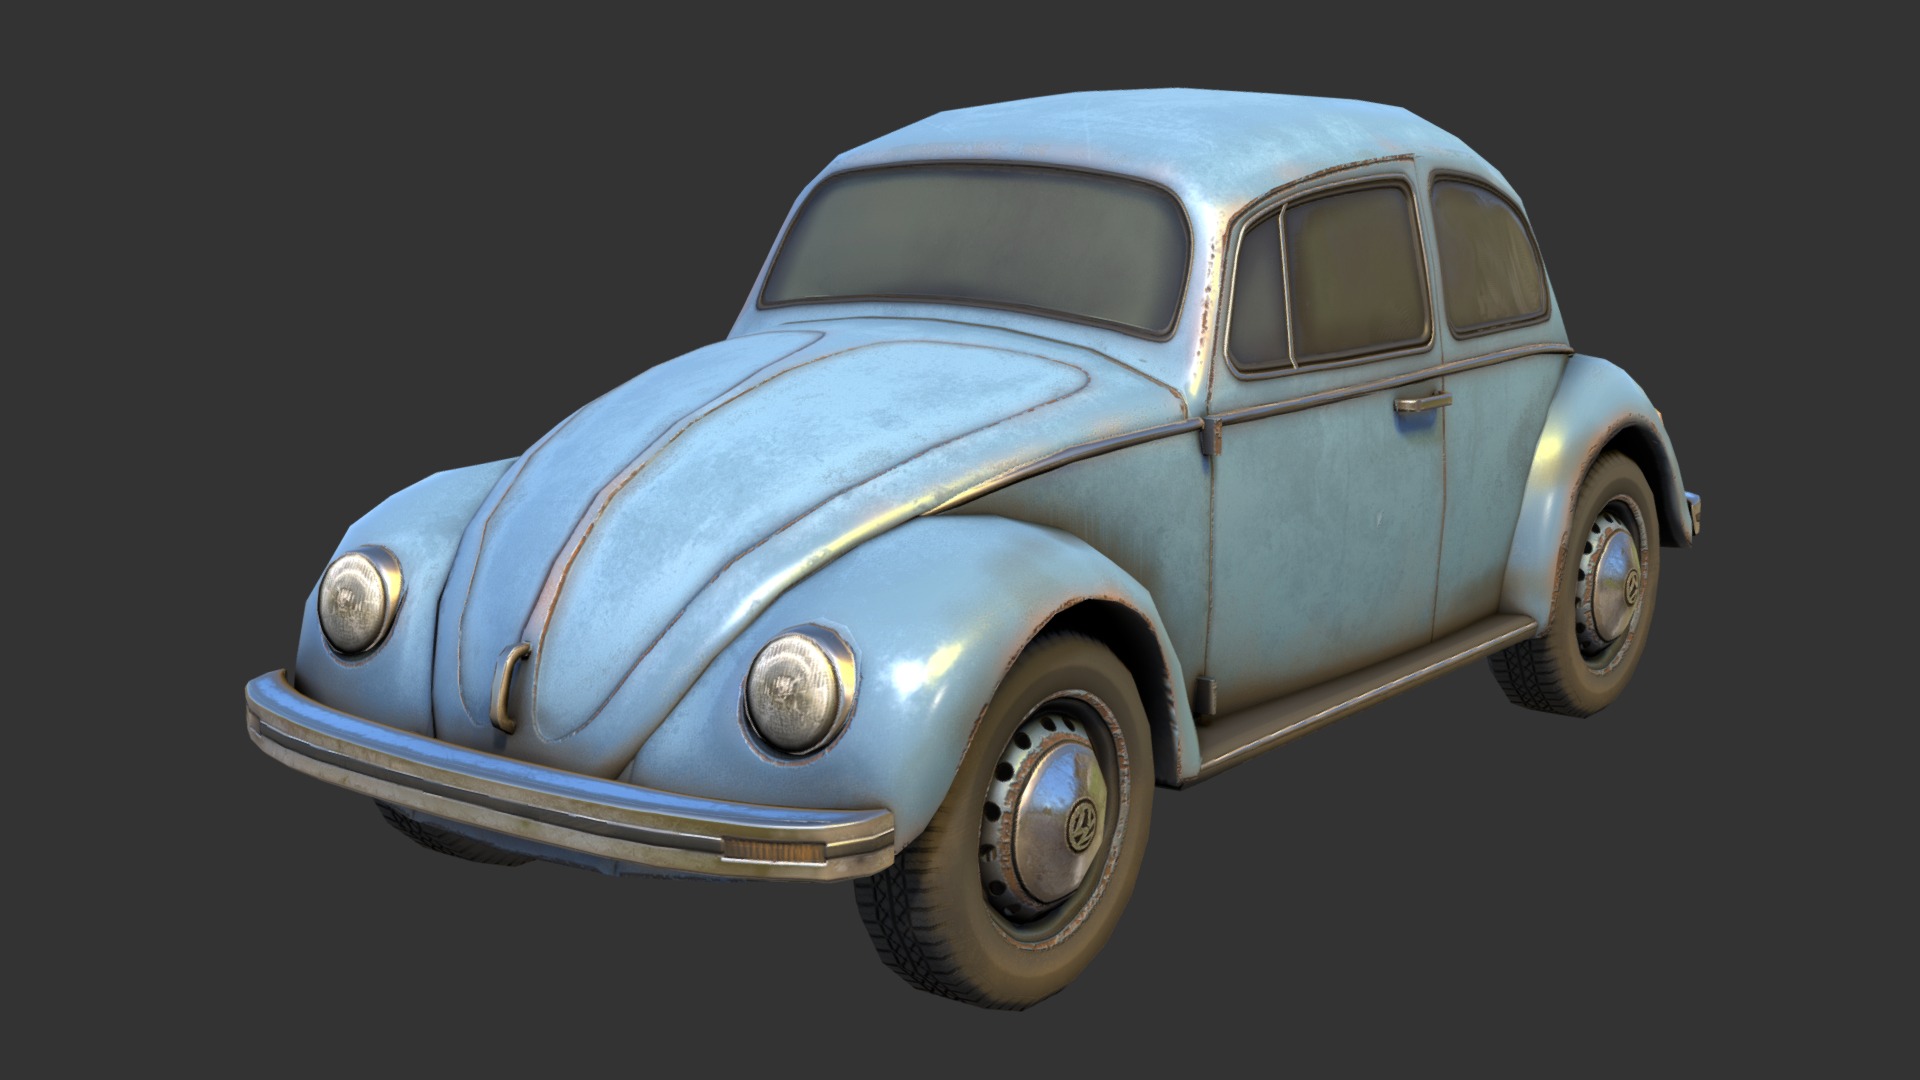 3D model Volkswagen Beetle - This is a 3D model of the Volkswagen Beetle. The 3D model is about a blue car with a white background.